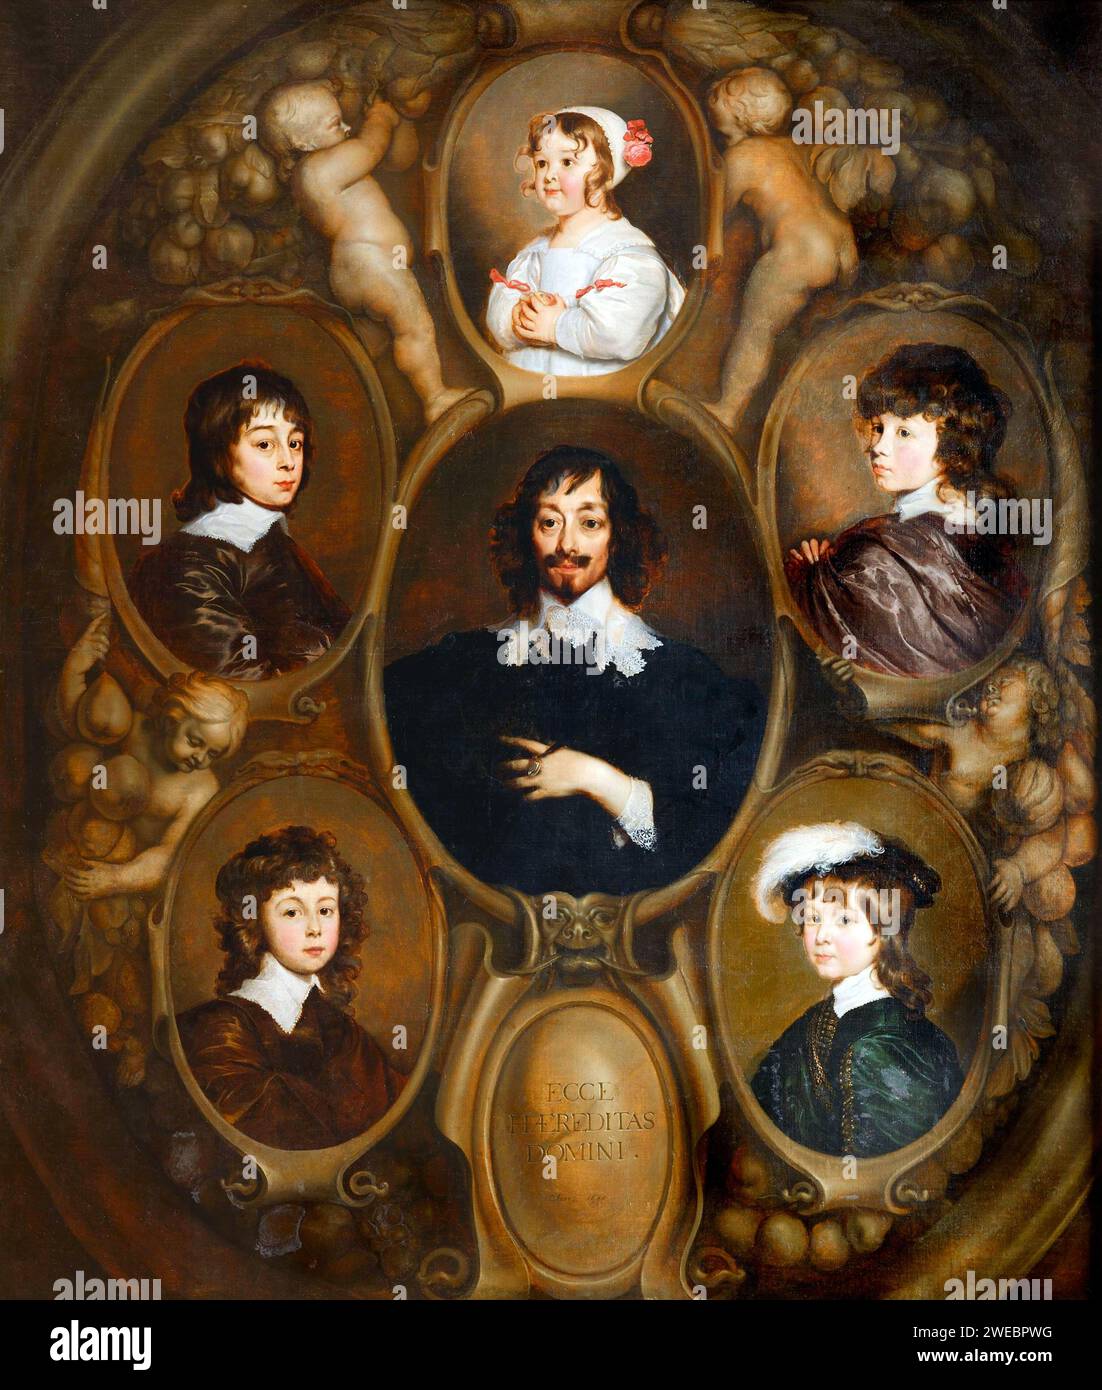 Constantijn Huygens and his children by Adriaen Hanneman His five children Constantijn II (t.r.; 1628-1697), Christiaen (b.l.; 1629-1695), Lodewijk (b.r.; 1631-1699), Philips (t.l.;1633-1699) and Suzanne (t.c.; 1637-1725) Stock Photo